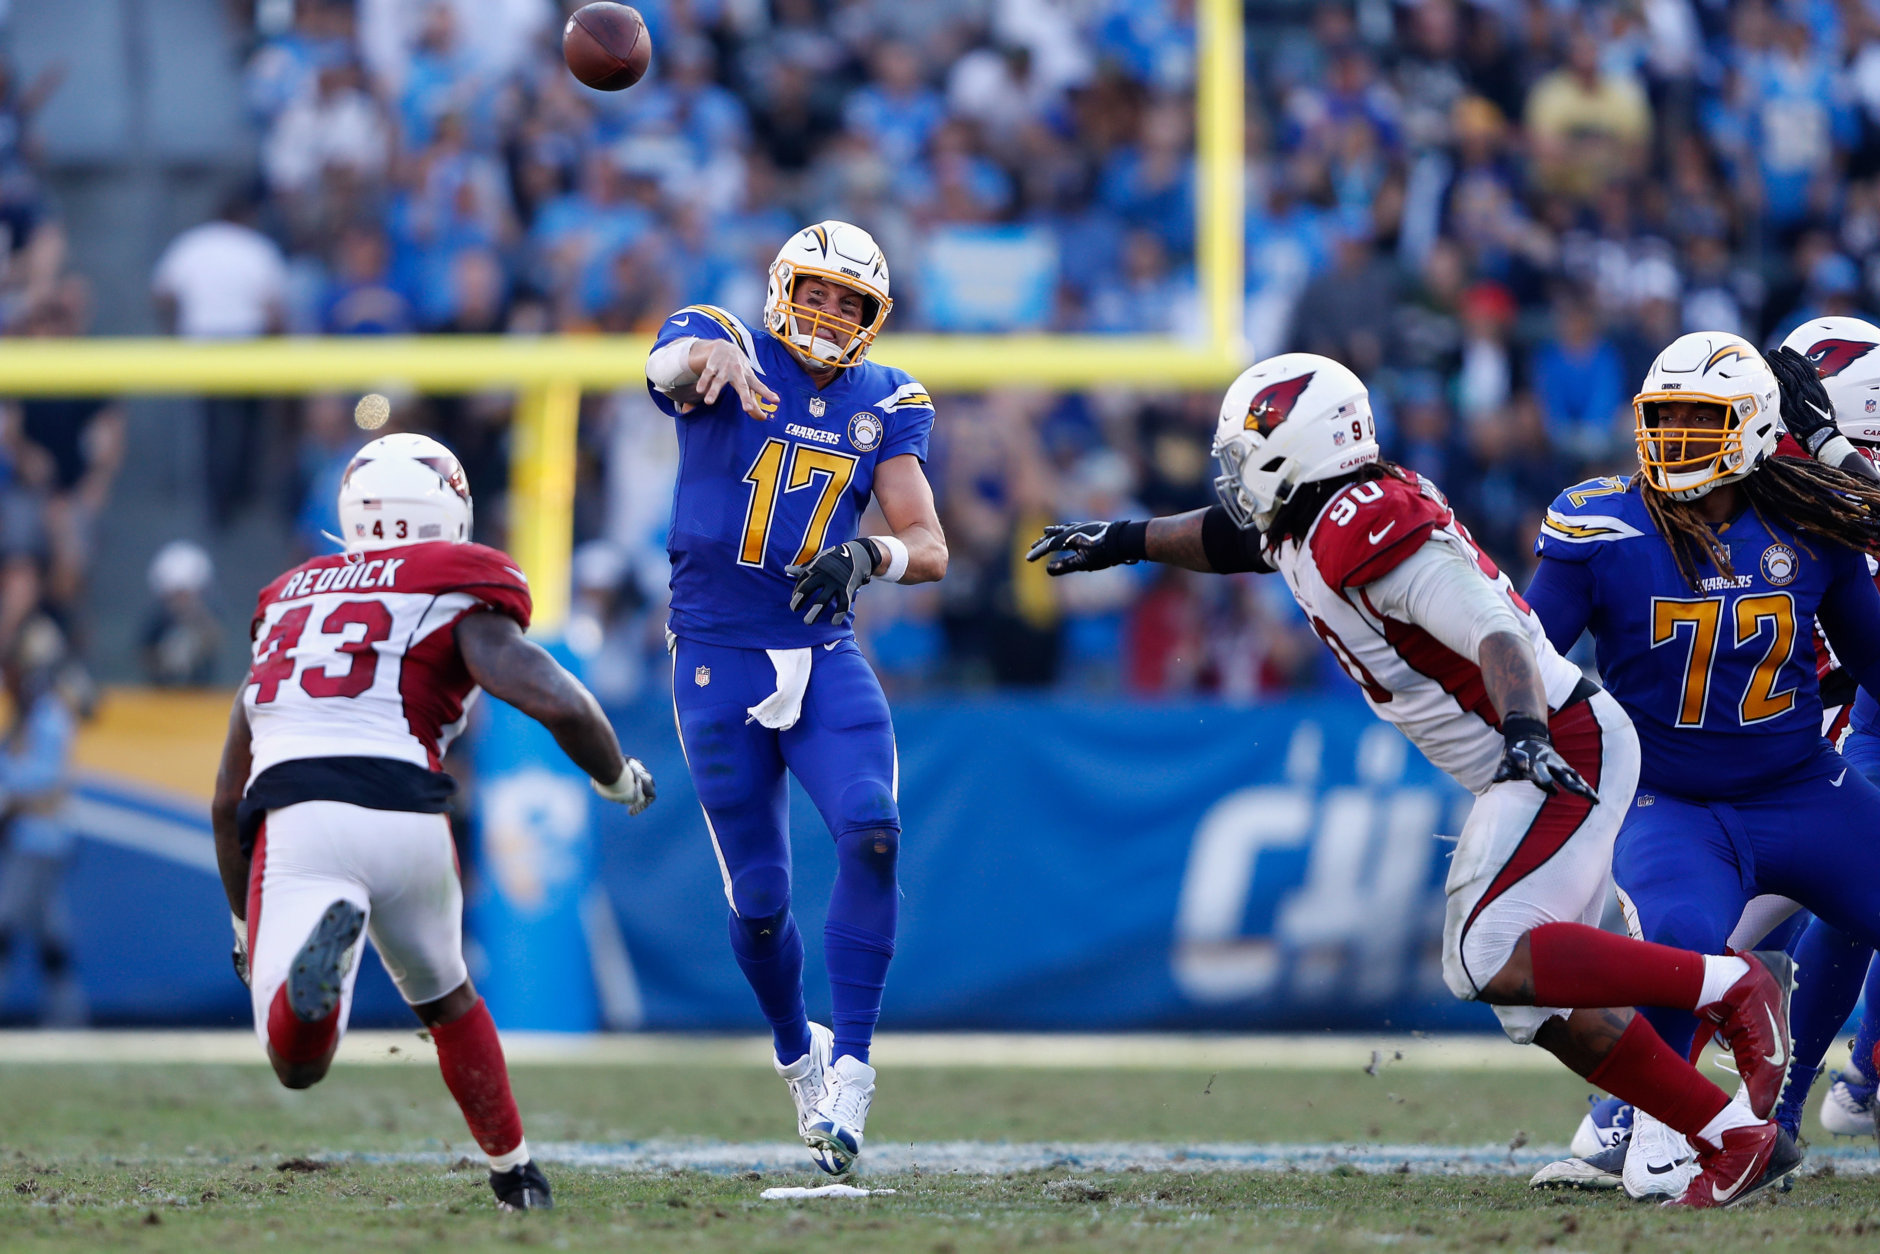 CARSON, CA - NOVEMBER 25:  Philip Rivers #17 of the Los Angeles Chargers passes the ball under pressure from Robert Nkemdiche #90 and Haason Reddick #43 of the Arizona Cardinals during the second half of a game at StubHub Center on November 25, 2018 in Carson, California.  (Photo by Sean M. Haffey/Getty Images)